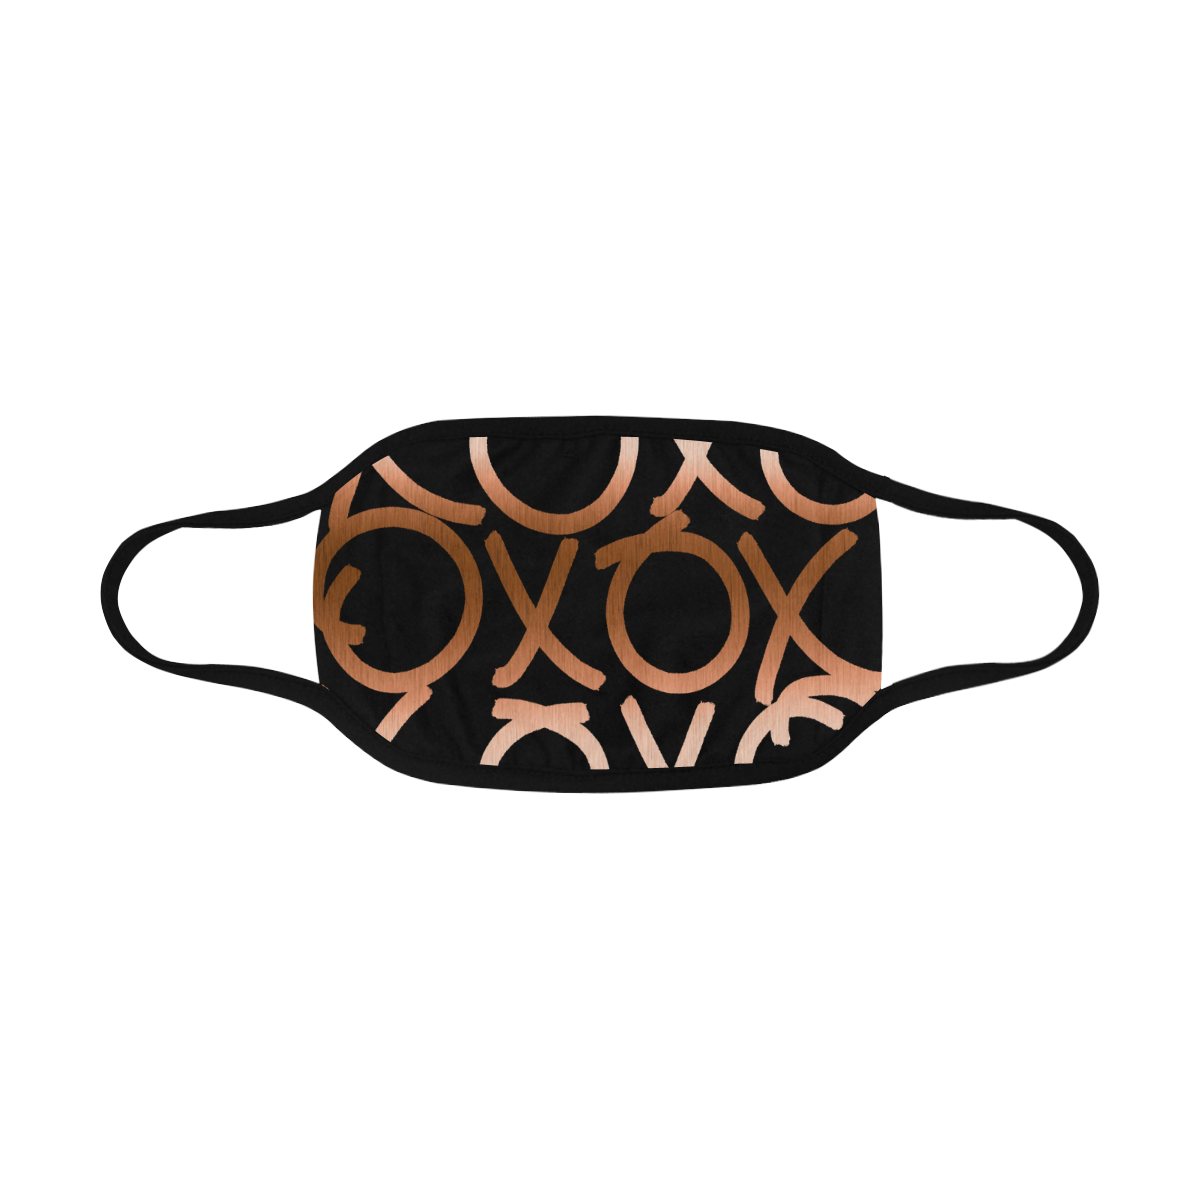 oxox copper Mouth Mask